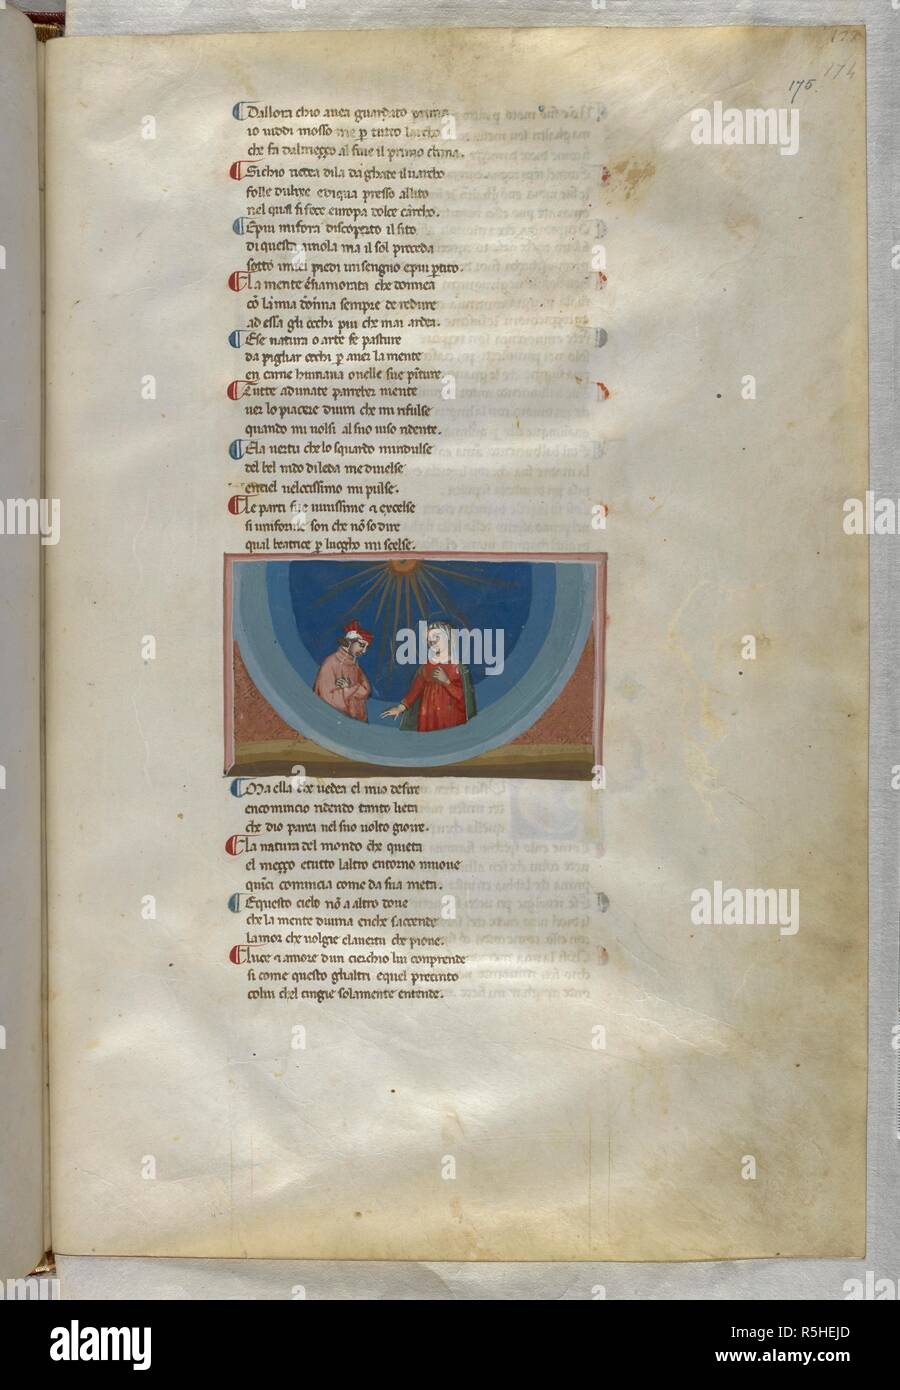 Paradiso : Dante listens to Beatrice's discourse. Dante Alighieri, Divina Commedia ( The Divine Comedy ), with a commentary in Latin. 1st half of the 14th century. Source: Egerton 943, f.175. Language: Italian, Latin. Stock Photo